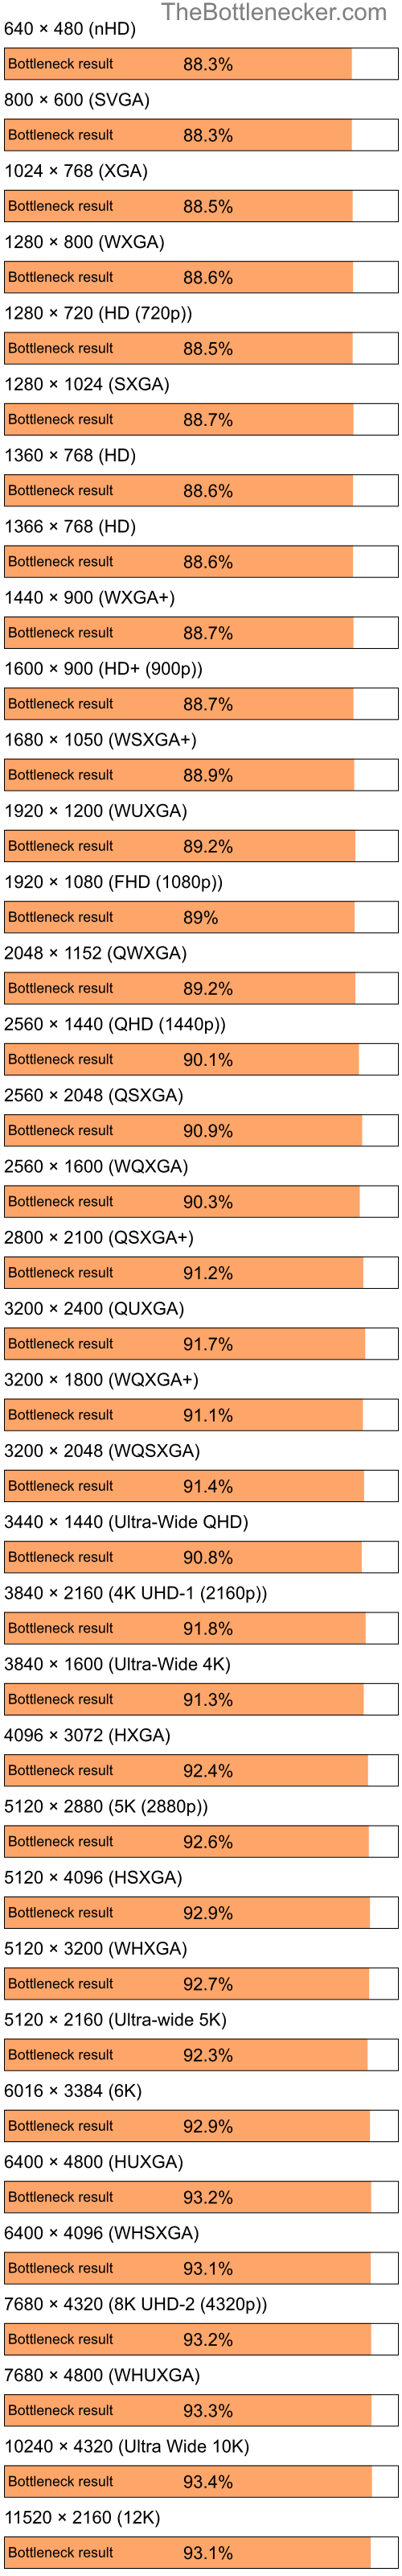 Bottleneck results by resolution for Intel Pentium 4 and NVIDIA GeForce2 GTS in Processor Intense Tasks